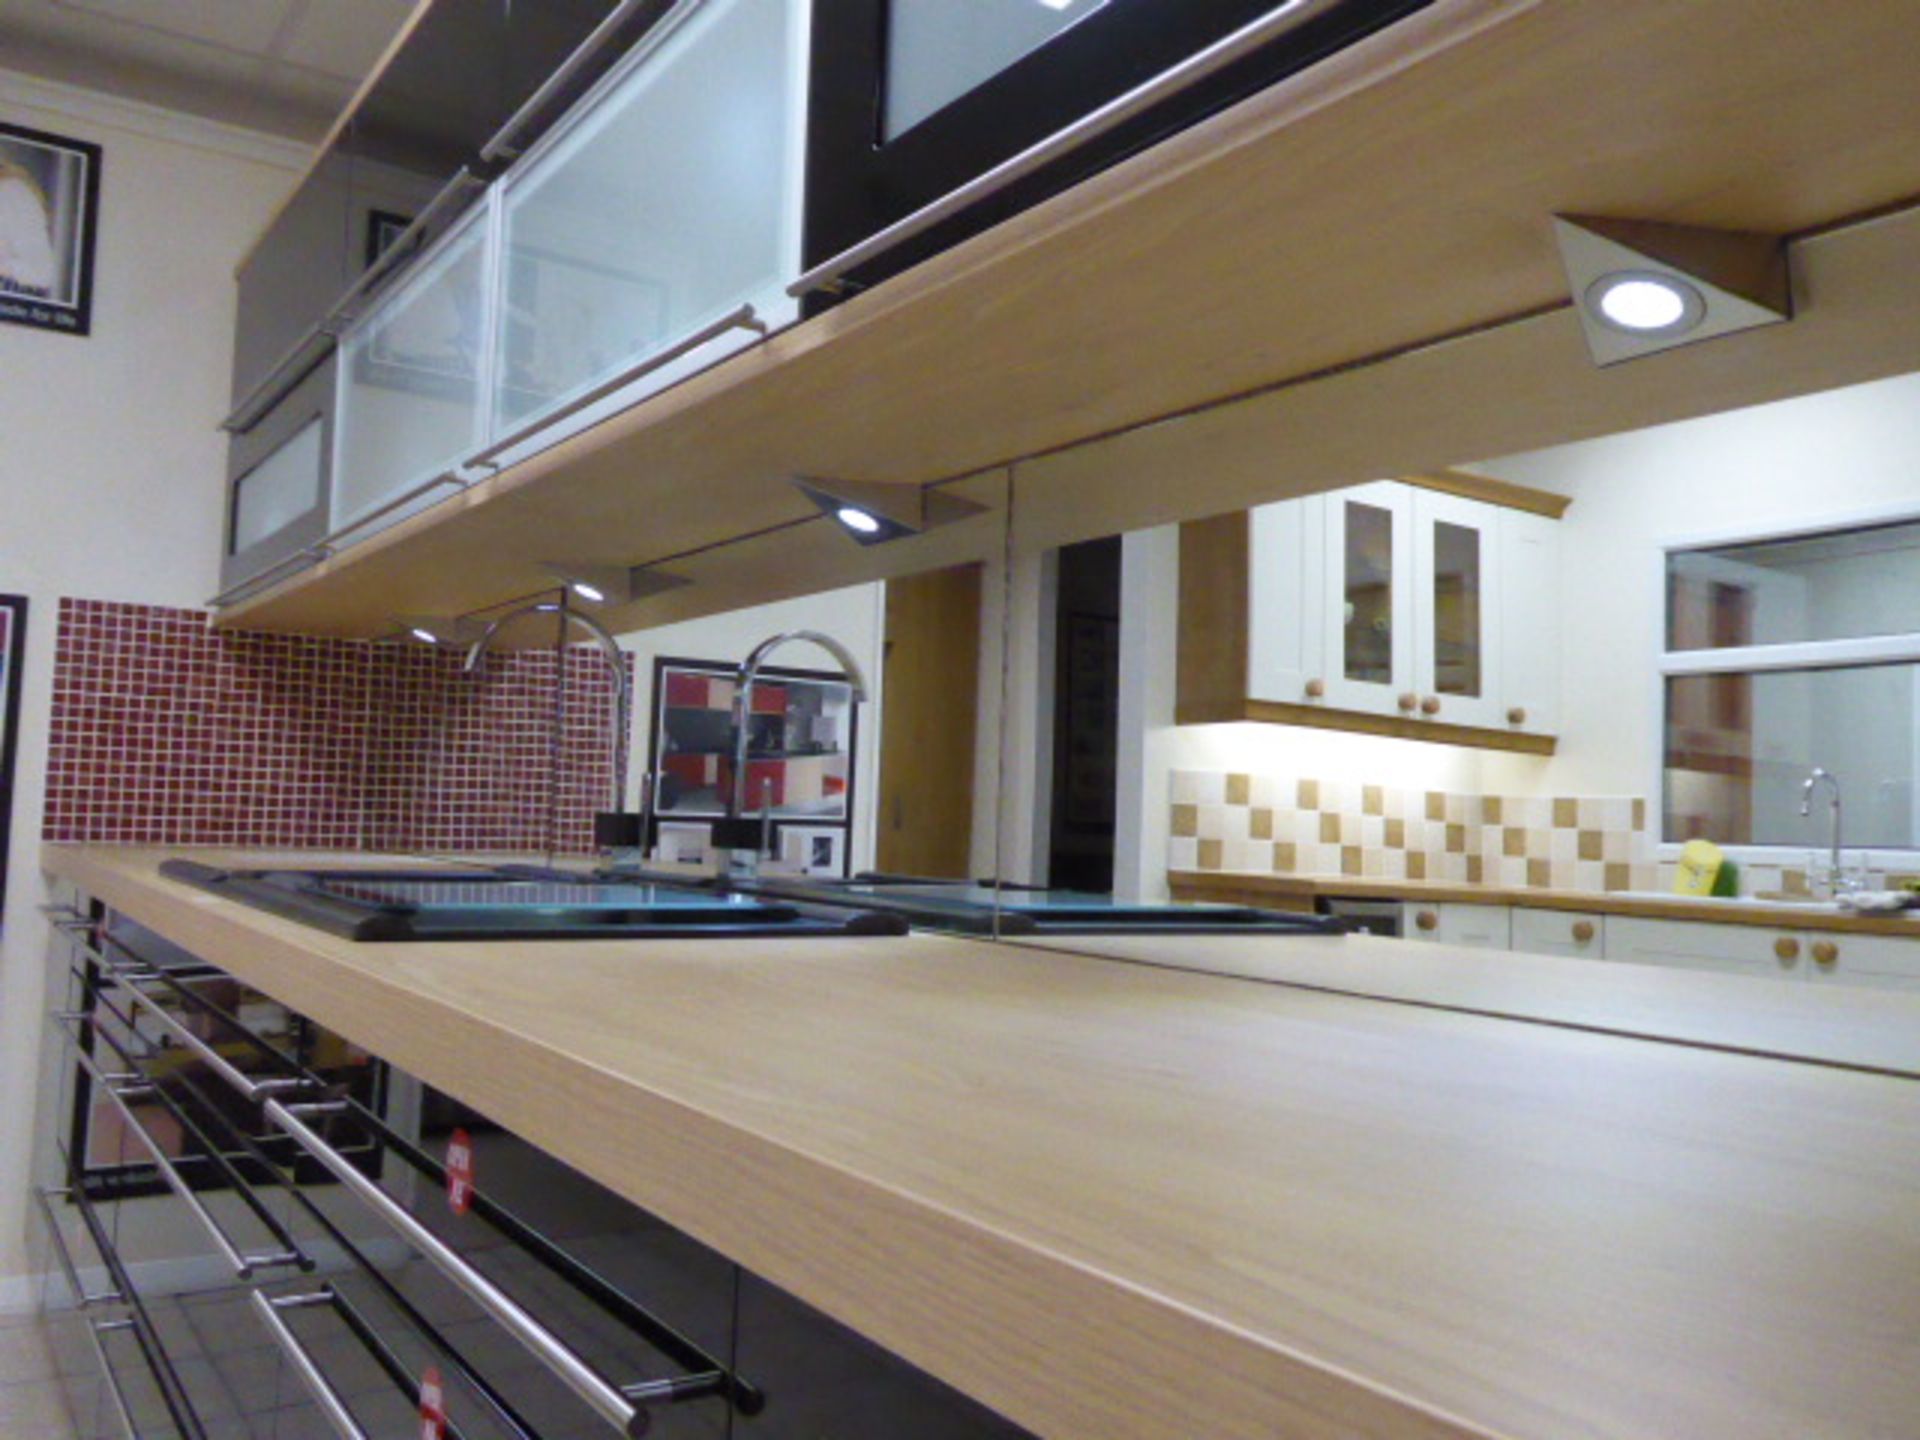 Alto gloss black galley kitchen measuring 370cm long with light oak wood laminate worktops. With a 1 - Image 11 of 12